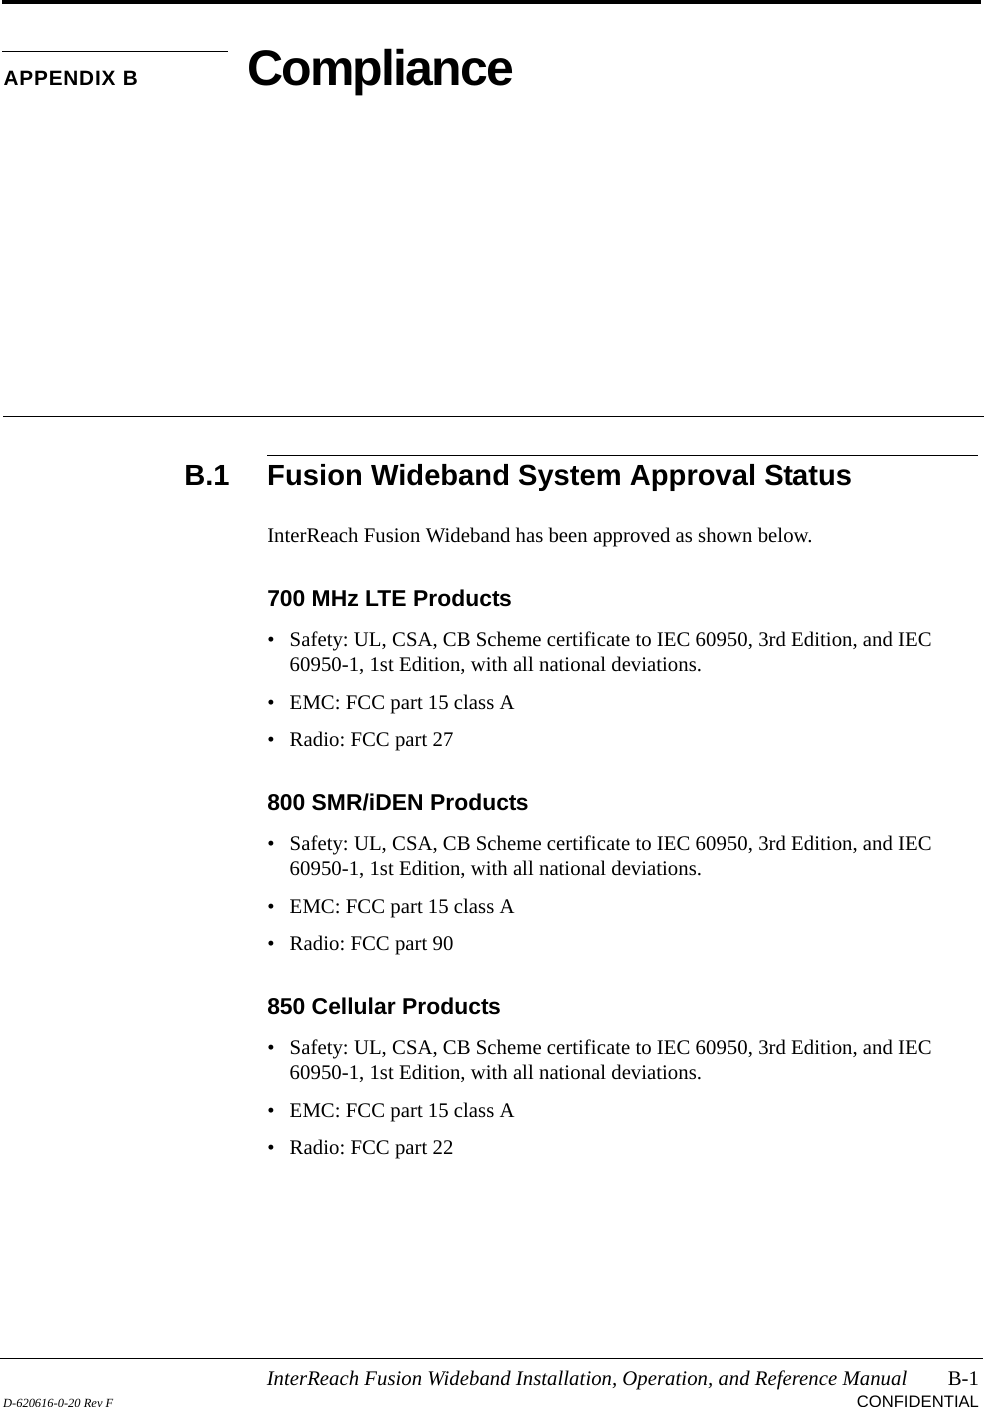 InterReach Fusion Wideband Installation, Operation, and Reference Manual B-1D-620616-0-20 Rev F CONFIDENTIALAPPENDIX B ComplianceB.1 Fusion Wideband System Approval StatusInterReach Fusion Wideband has been approved as shown below.700 MHz LTE Products• Safety: UL, CSA, CB Scheme certificate to IEC 60950, 3rd Edition, and IEC 60950-1, 1st Edition, with all national deviations.• EMC: FCC part 15 class A• Radio: FCC part 27800 SMR/iDEN Products• Safety: UL, CSA, CB Scheme certificate to IEC 60950, 3rd Edition, and IEC 60950-1, 1st Edition, with all national deviations.• EMC: FCC part 15 class A• Radio: FCC part 90850 Cellular Products• Safety: UL, CSA, CB Scheme certificate to IEC 60950, 3rd Edition, and IEC 60950-1, 1st Edition, with all national deviations.• EMC: FCC part 15 class A• Radio: FCC part 22